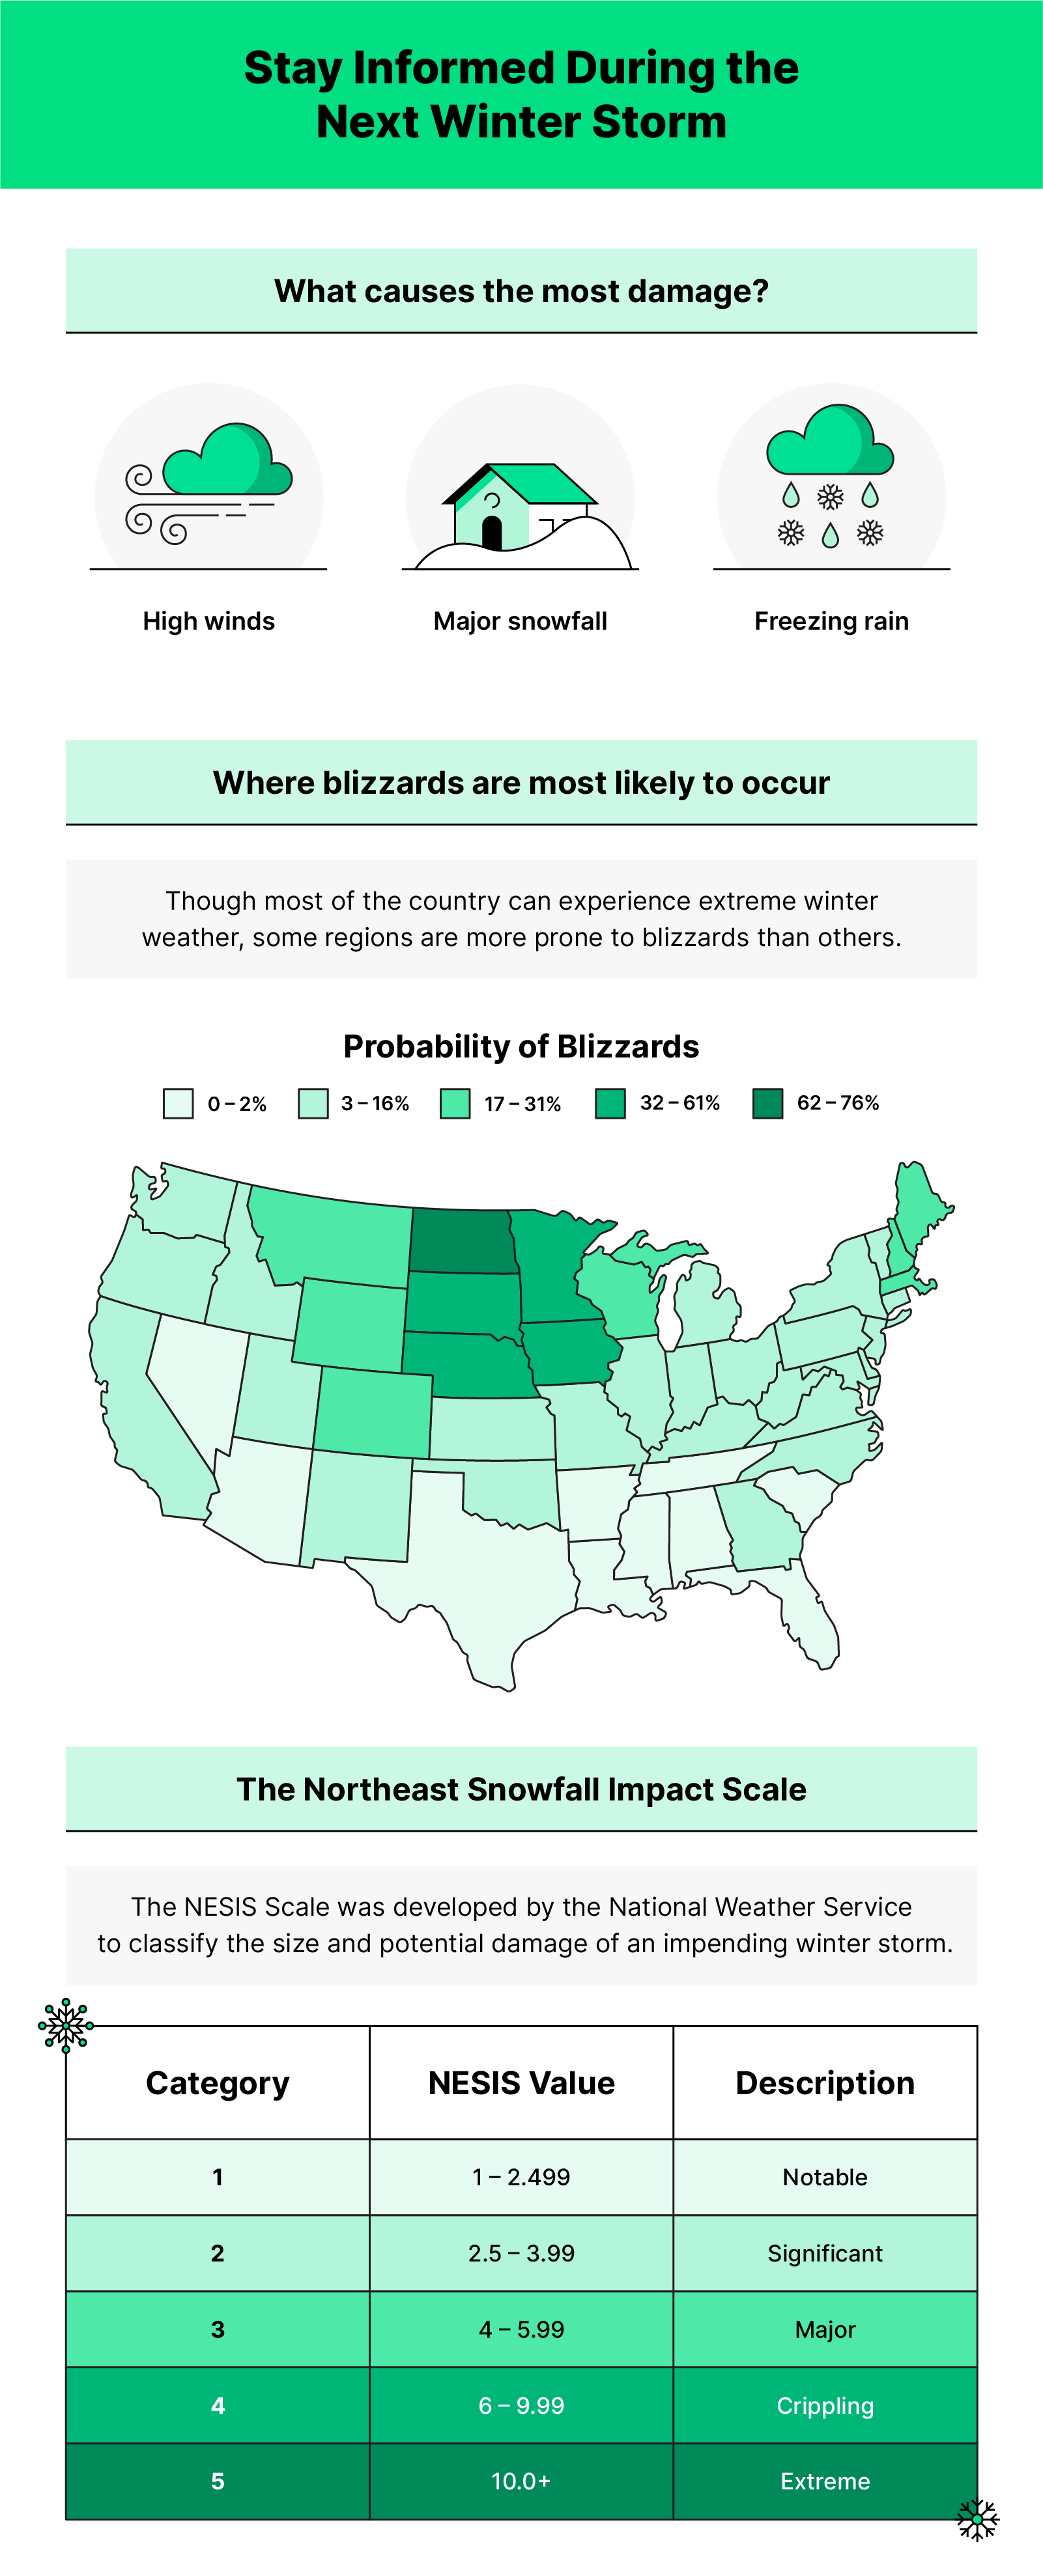 Illustrations and a heat map of the US showing where blizzards are most common